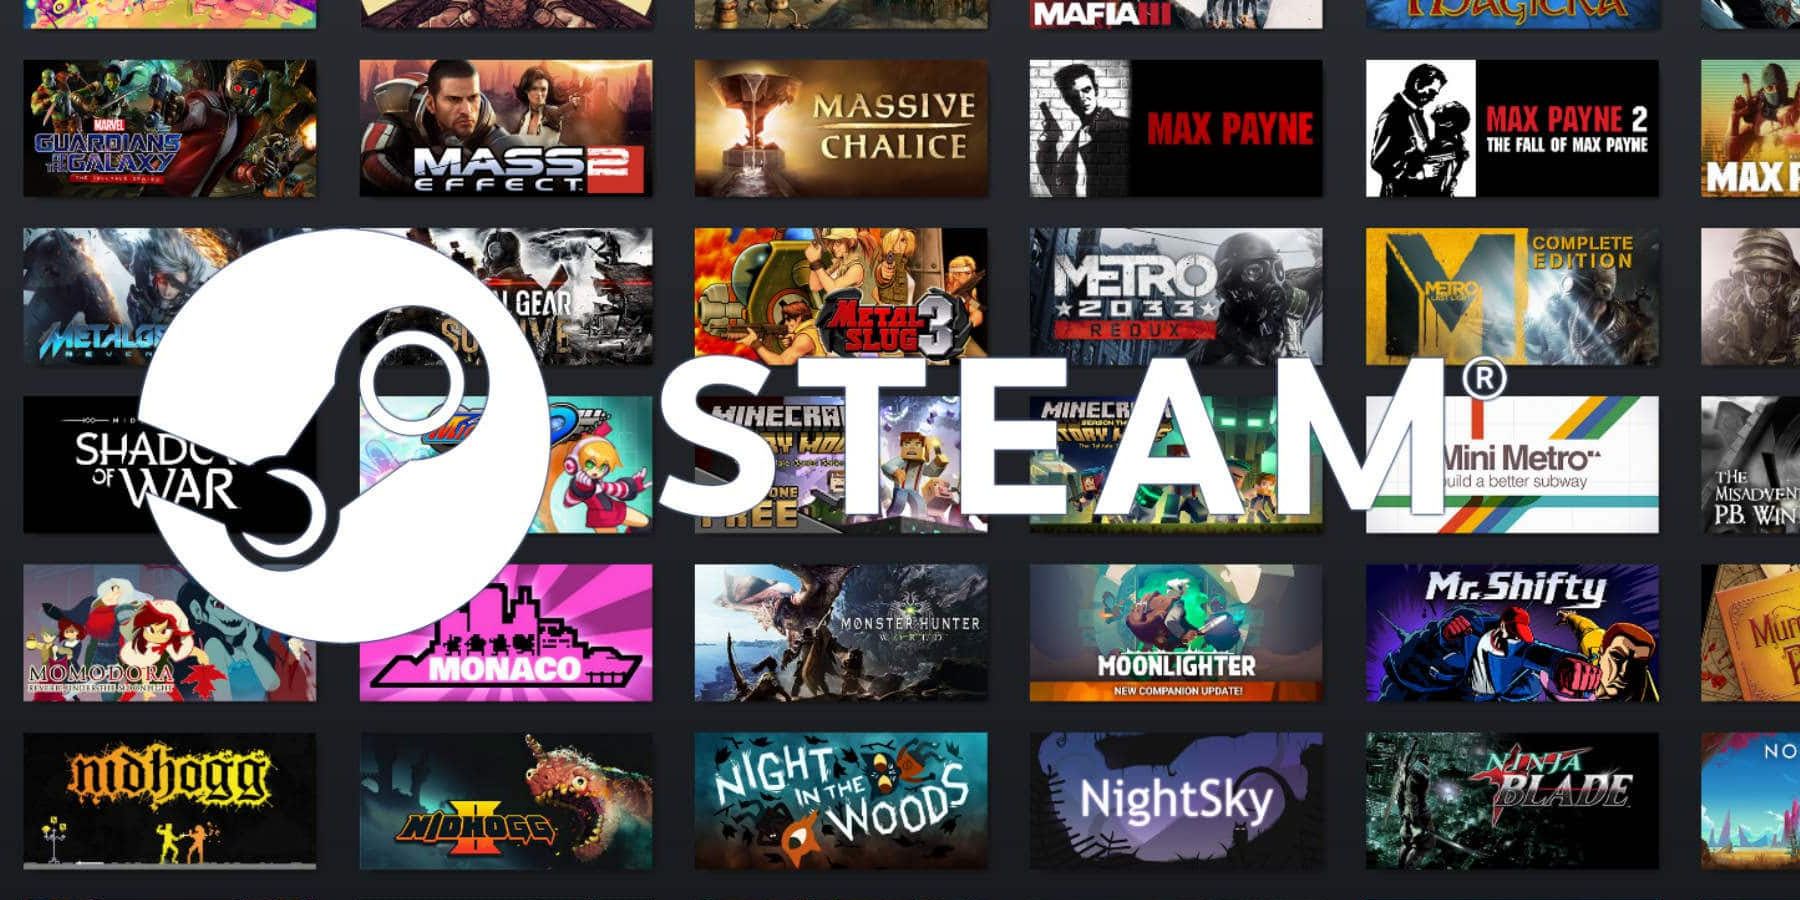 How to Bulk Install multiple Games at once in Steam on PC